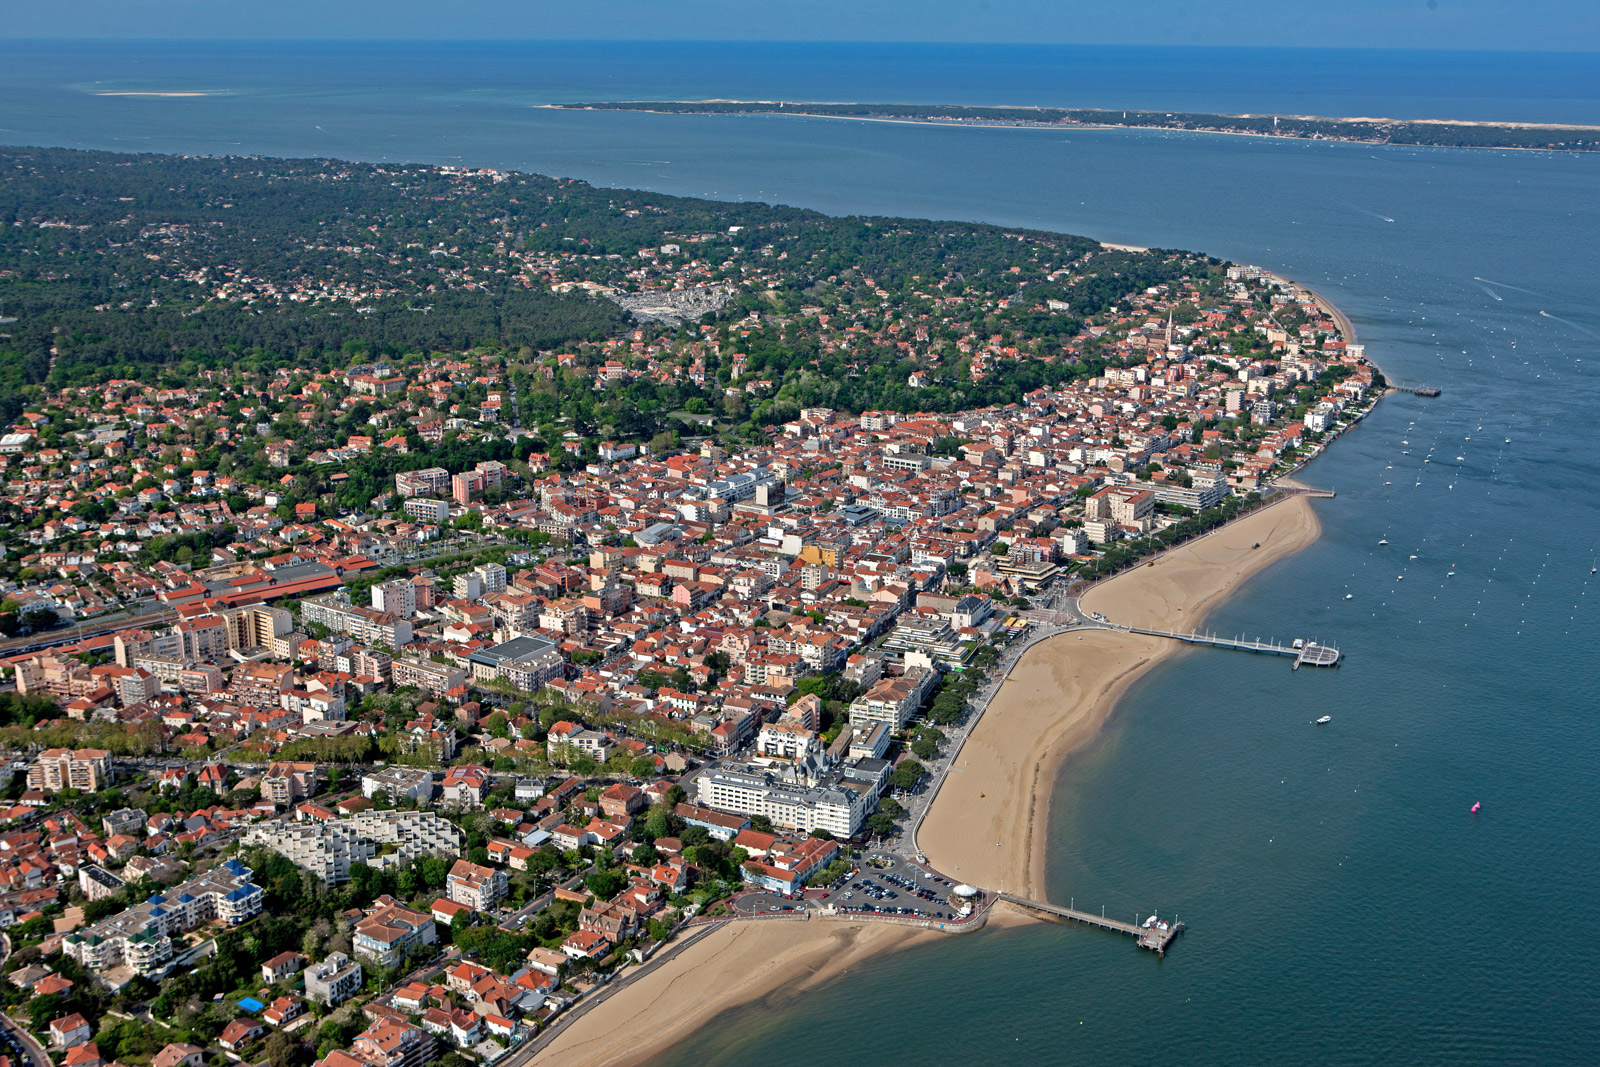 Top 10 things to do in the Bassin d'Arcachon